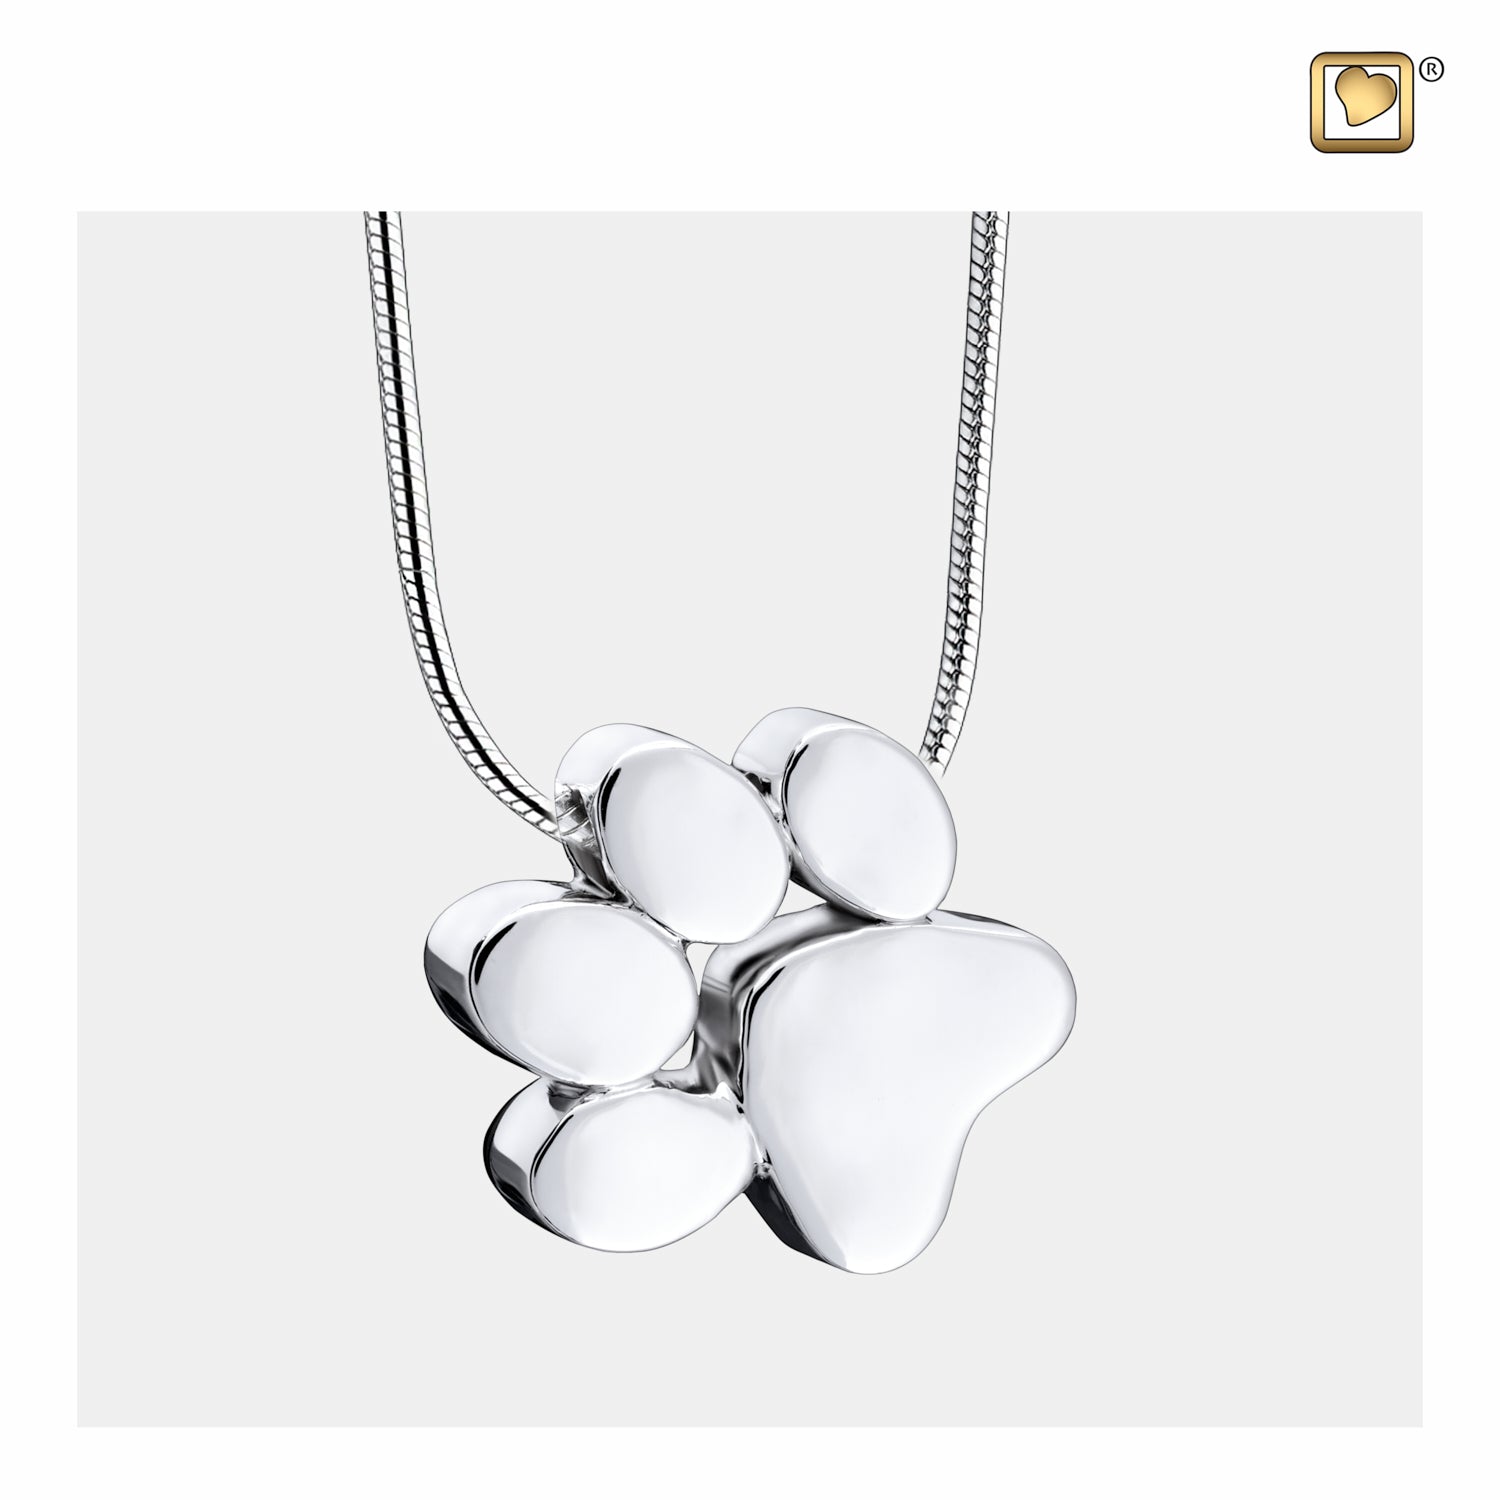 Buy Paw Print Locket Heart Paw Print Necklace Silver Paw Print Online in  India - Etsy